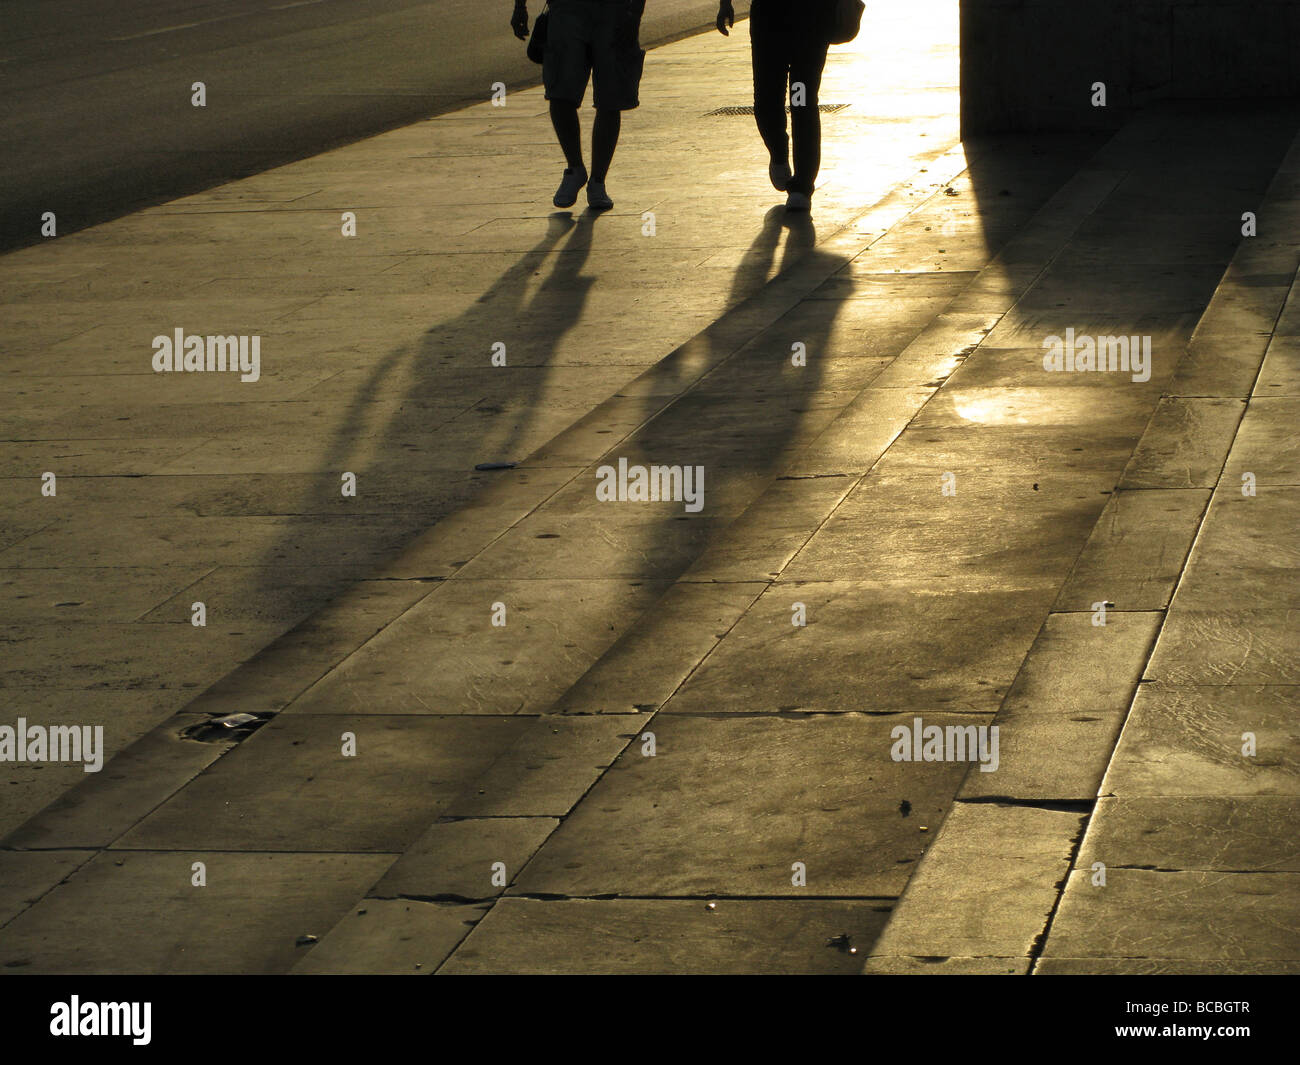 two people walking in street road in city town Stock Photo